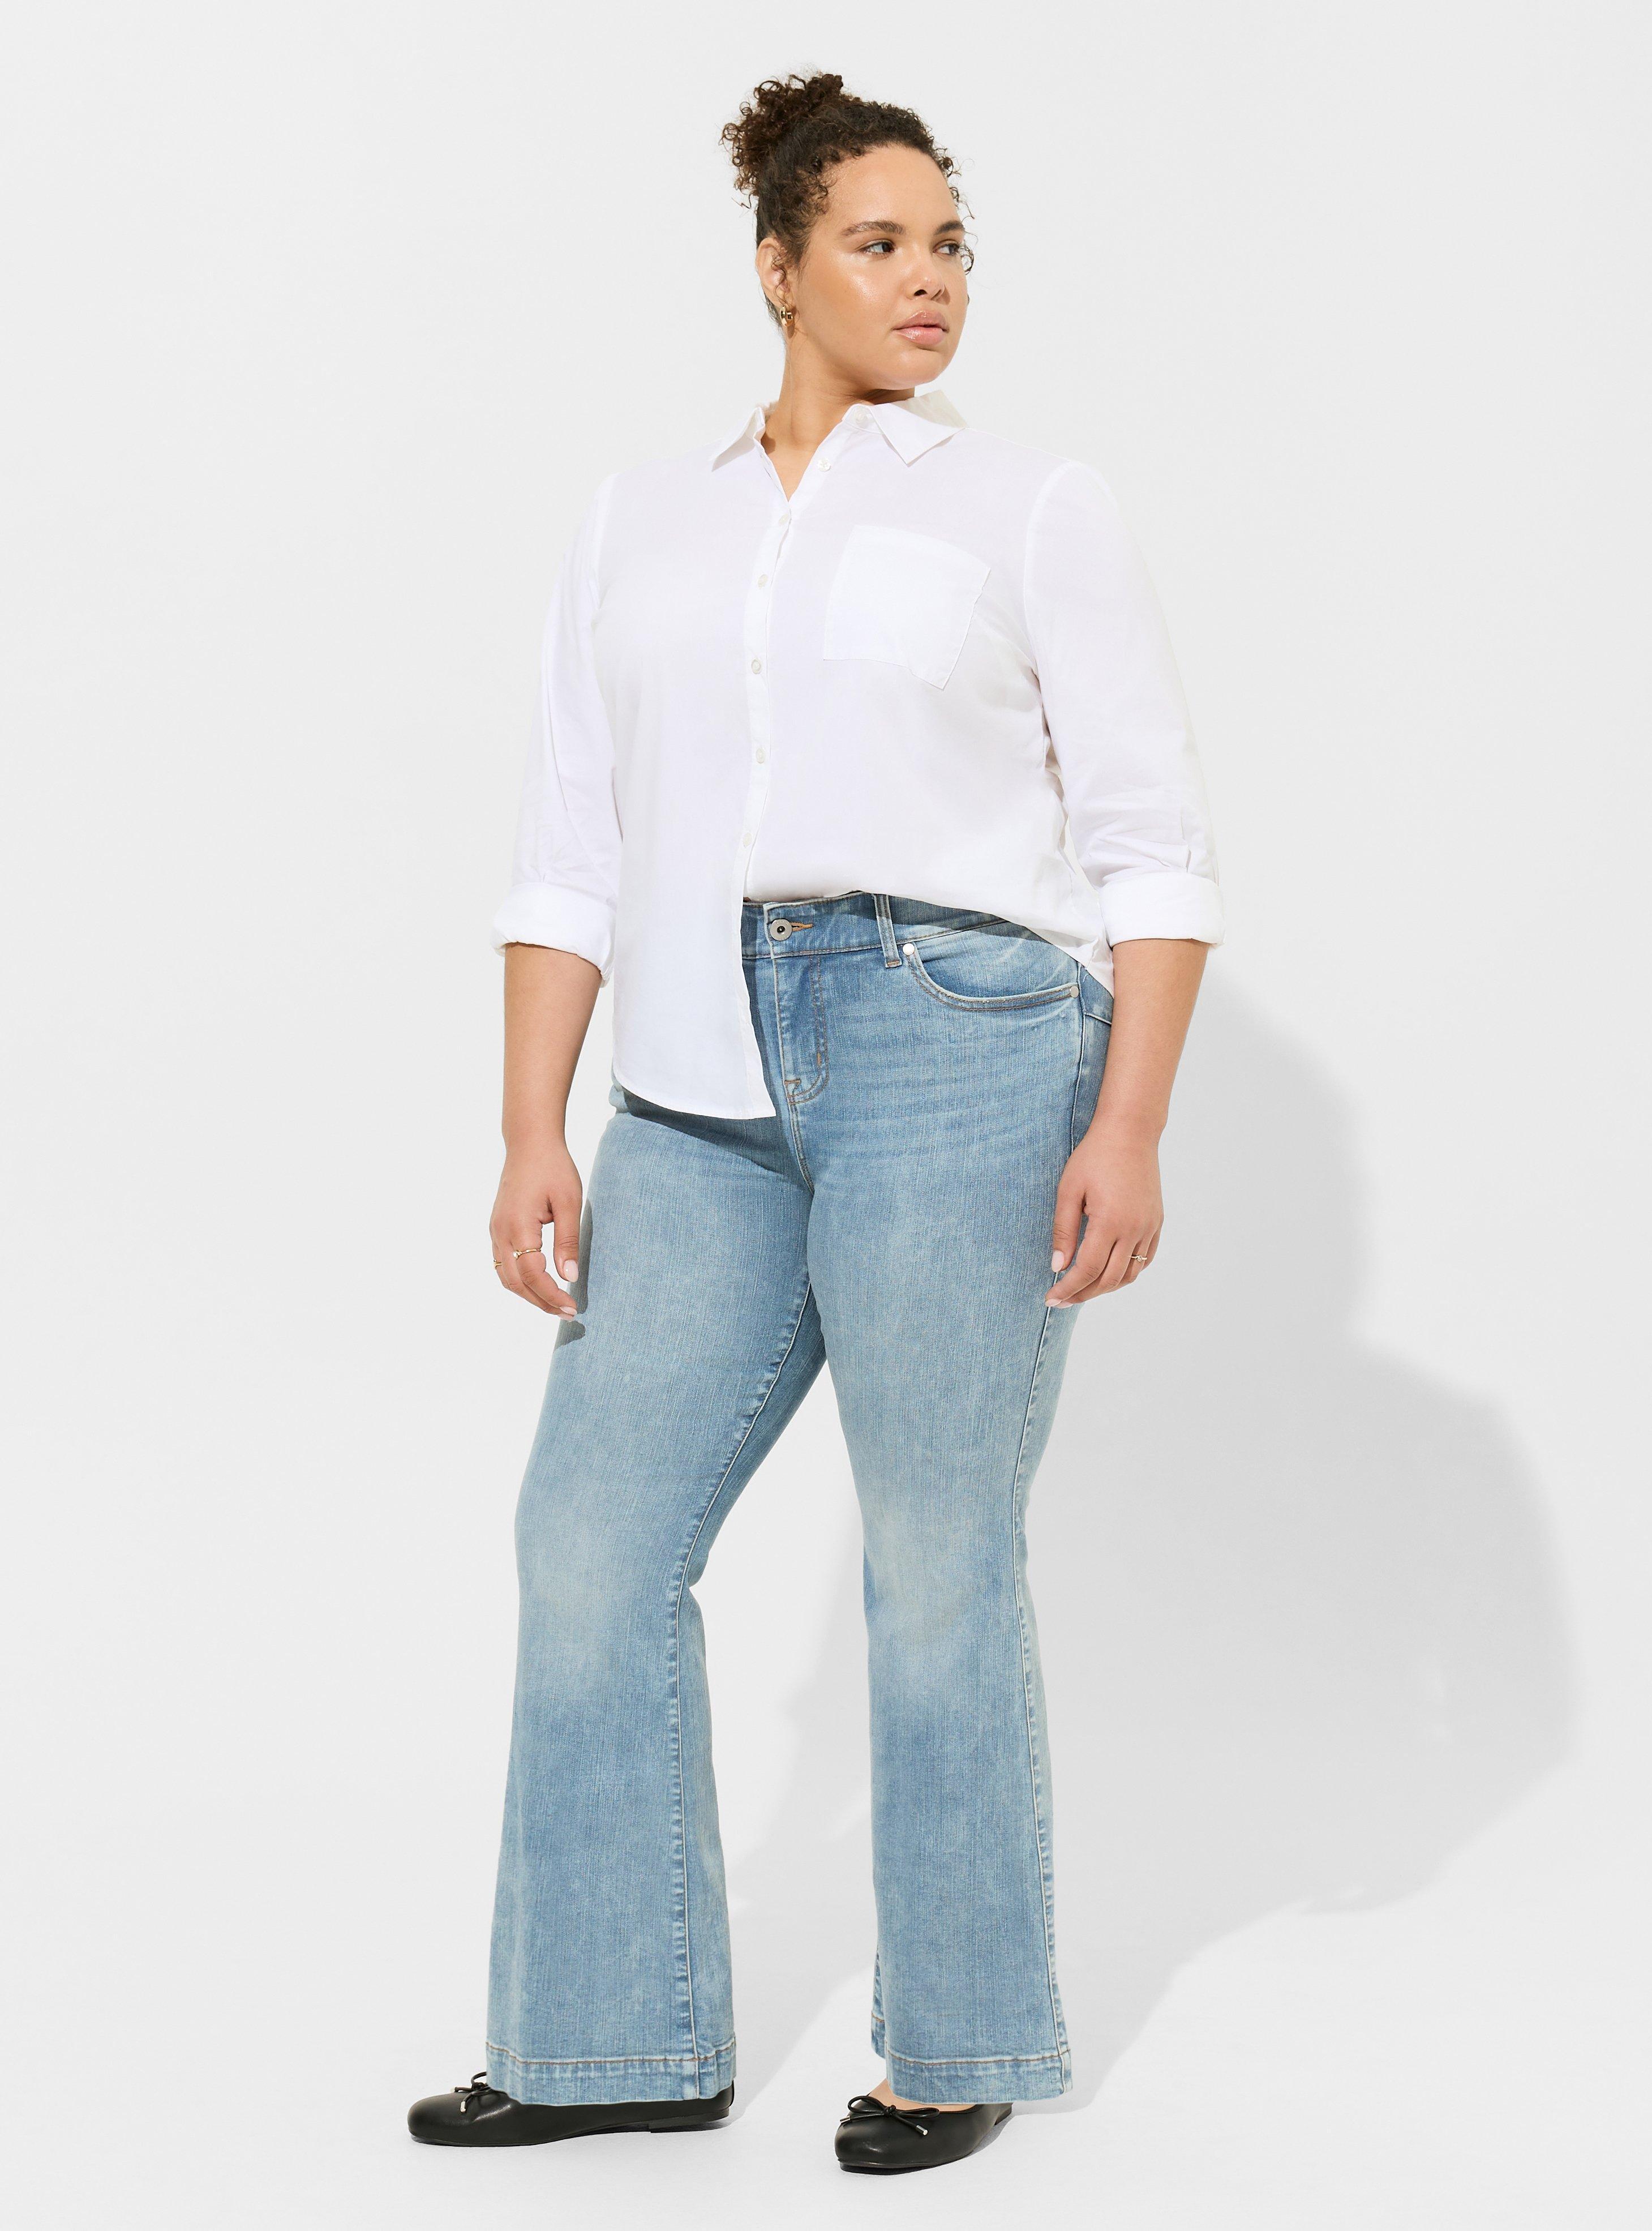 Flaunting Flares: Plus-Size Flare Jeans Set to Make a Comeback